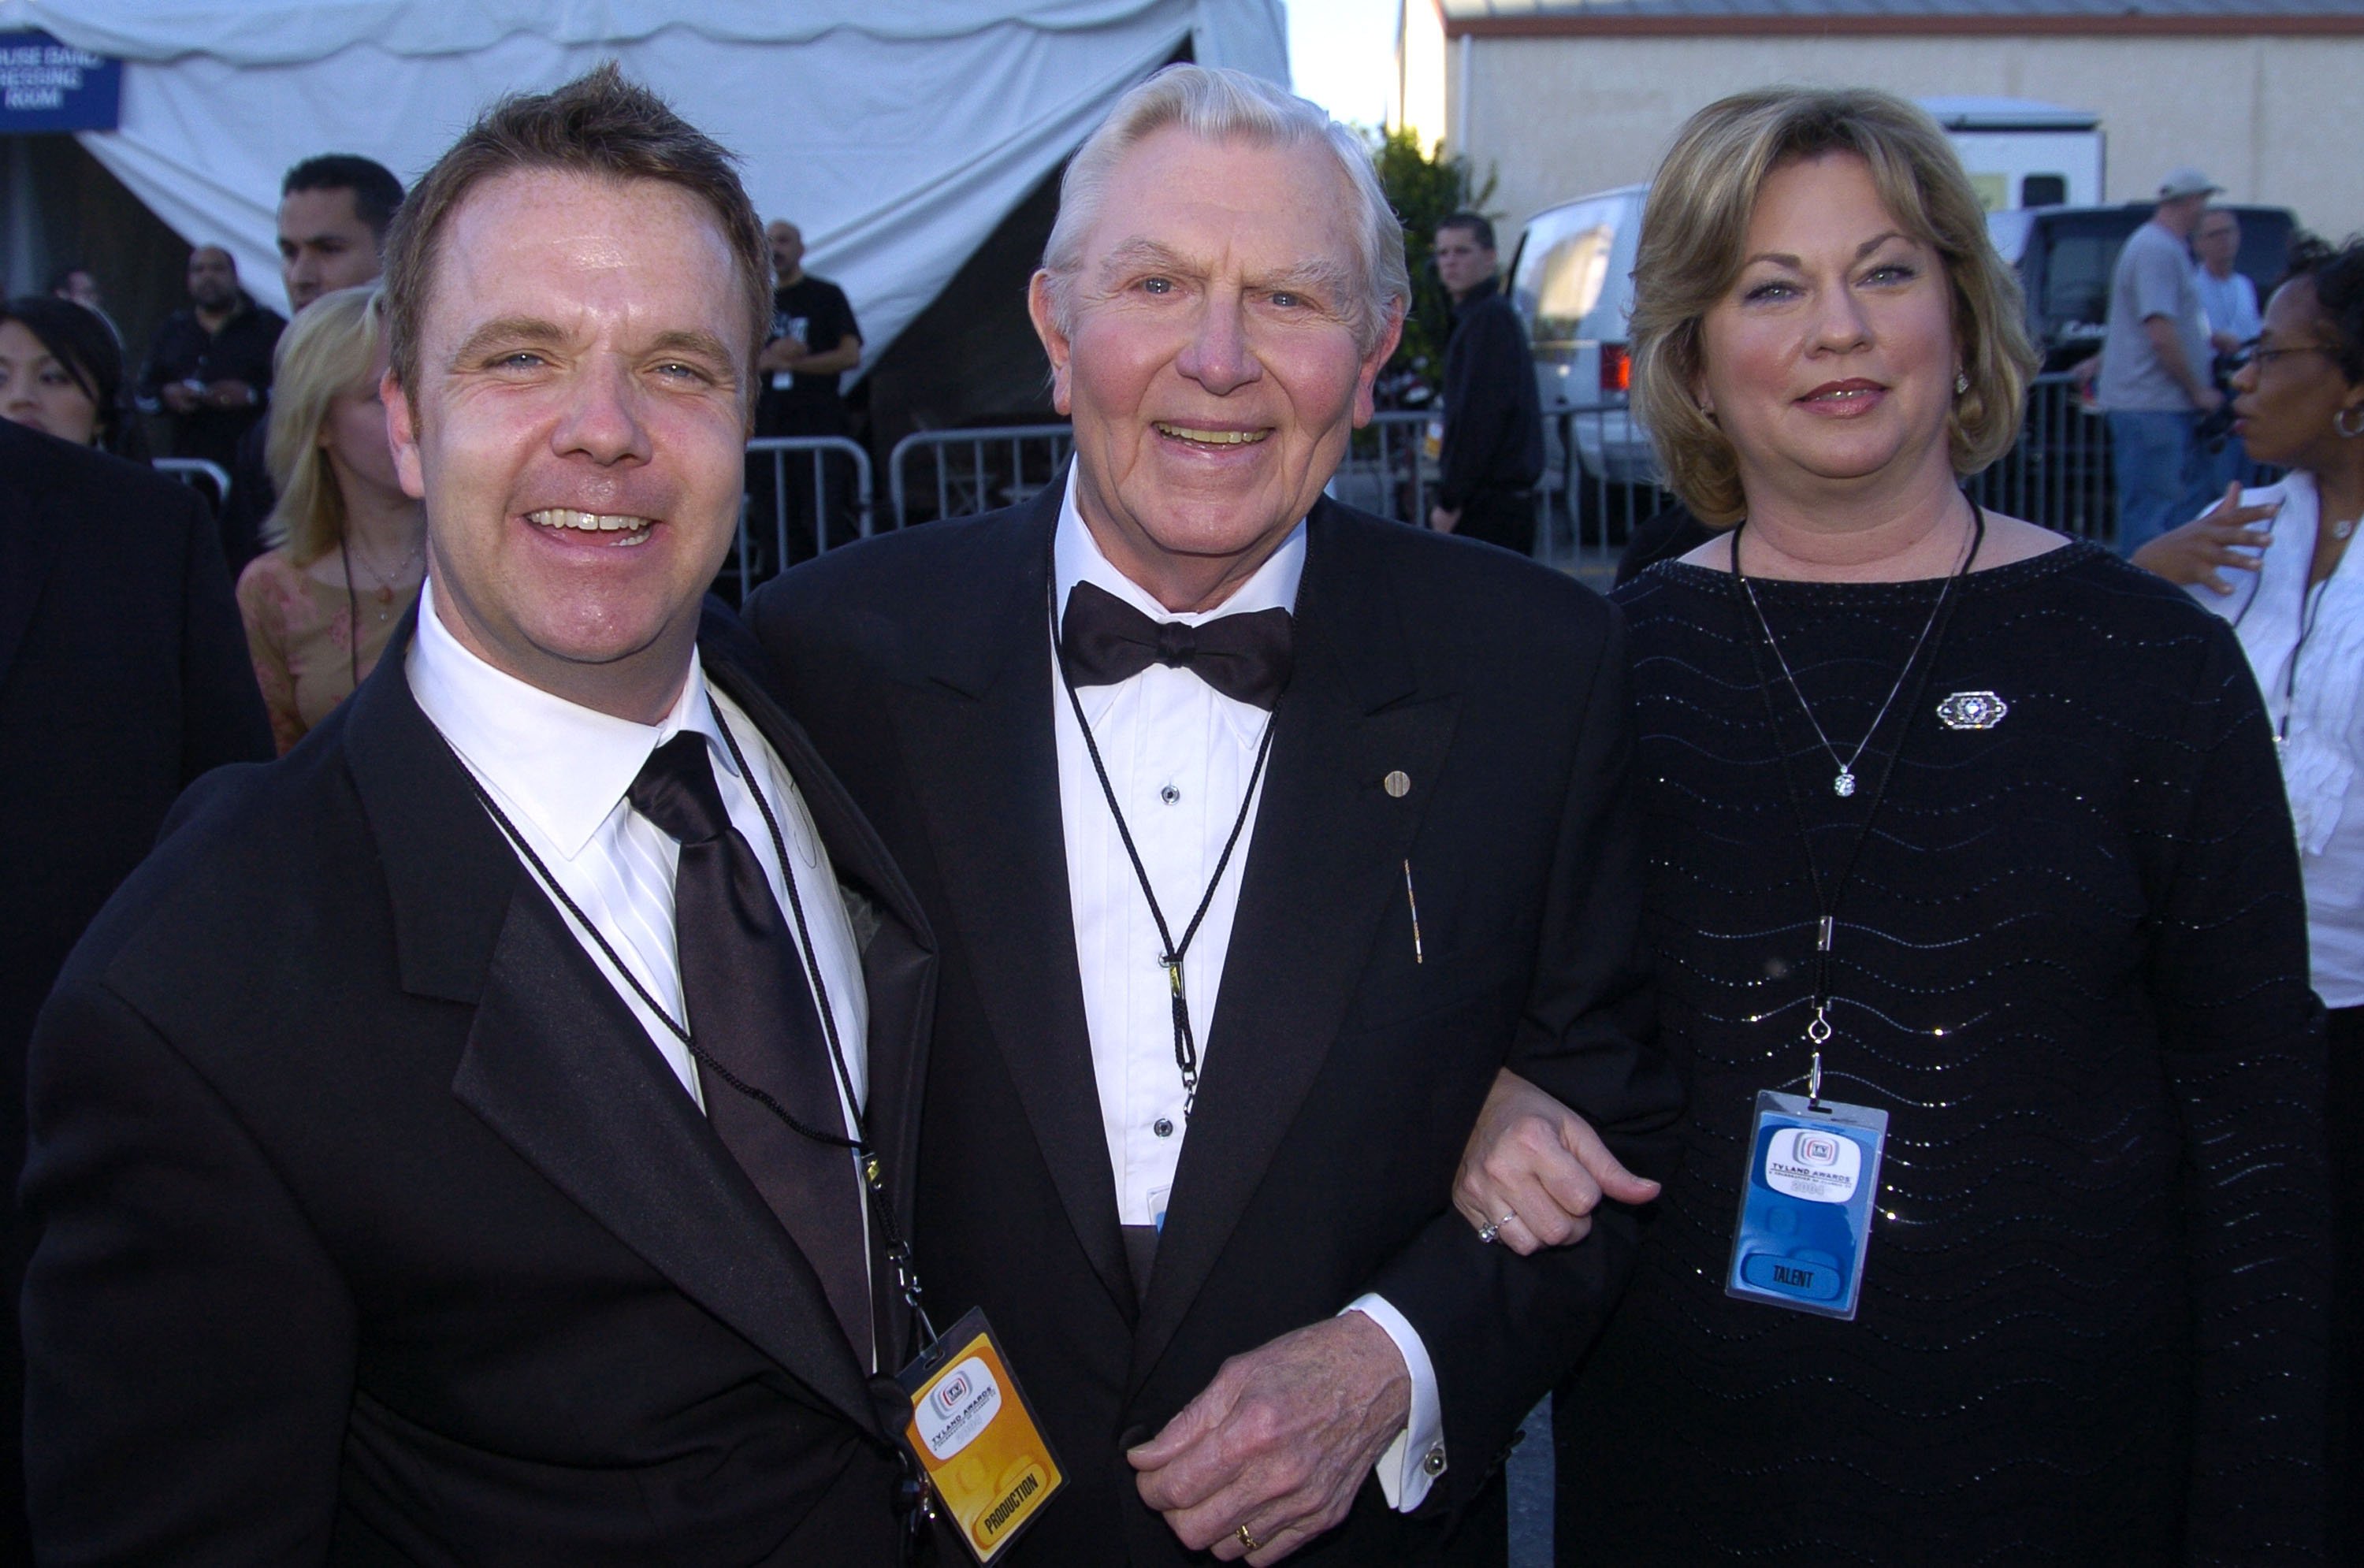 Paul Ward, Andy Griffith and Cindi Knight during 2004 TV Land Awards on March 07, 2004, at The Palladium in Hollywood, California. | Source: Getty Images